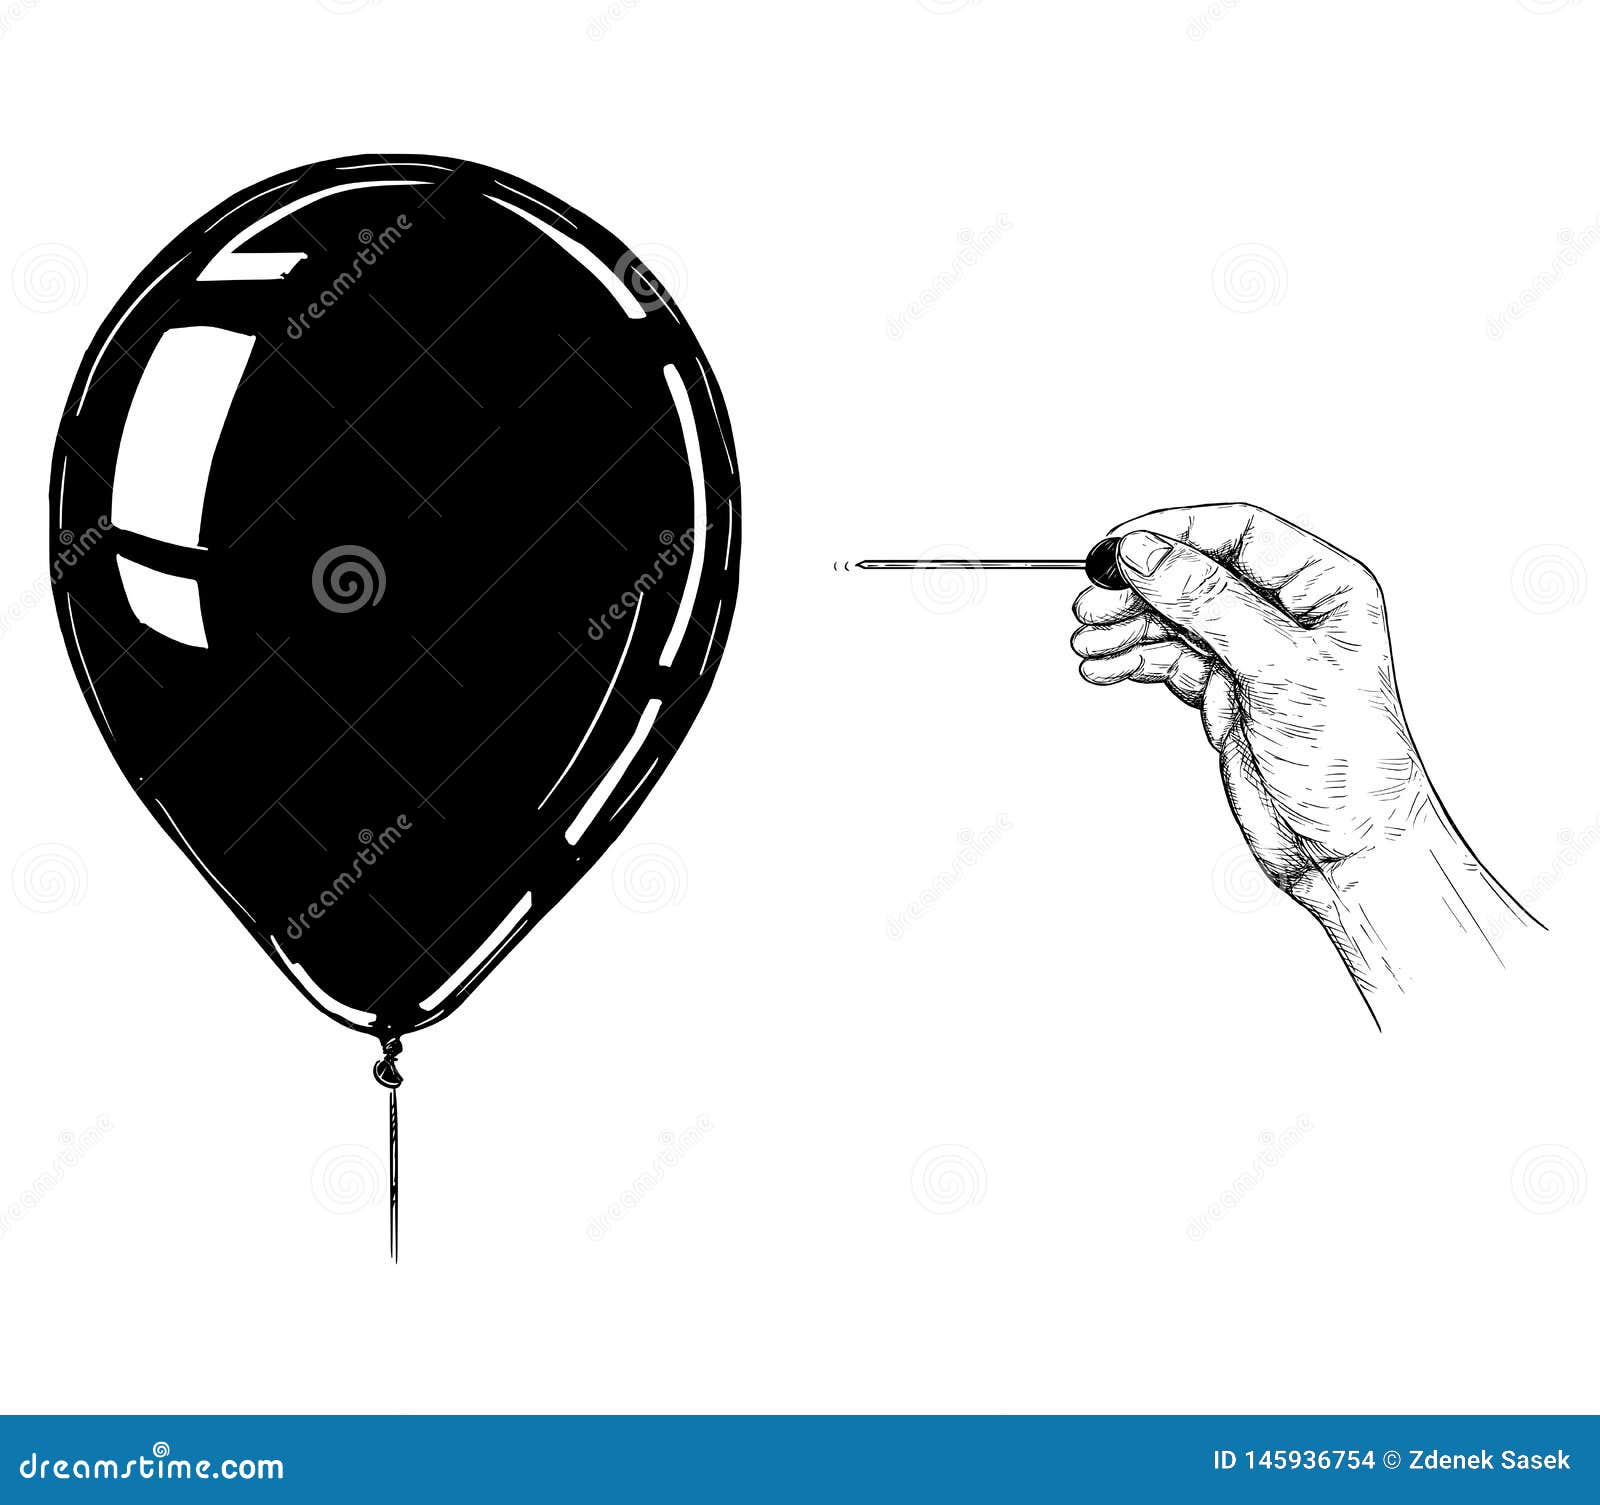 cartoon  or drawing of hand with needle or pin popping balloon